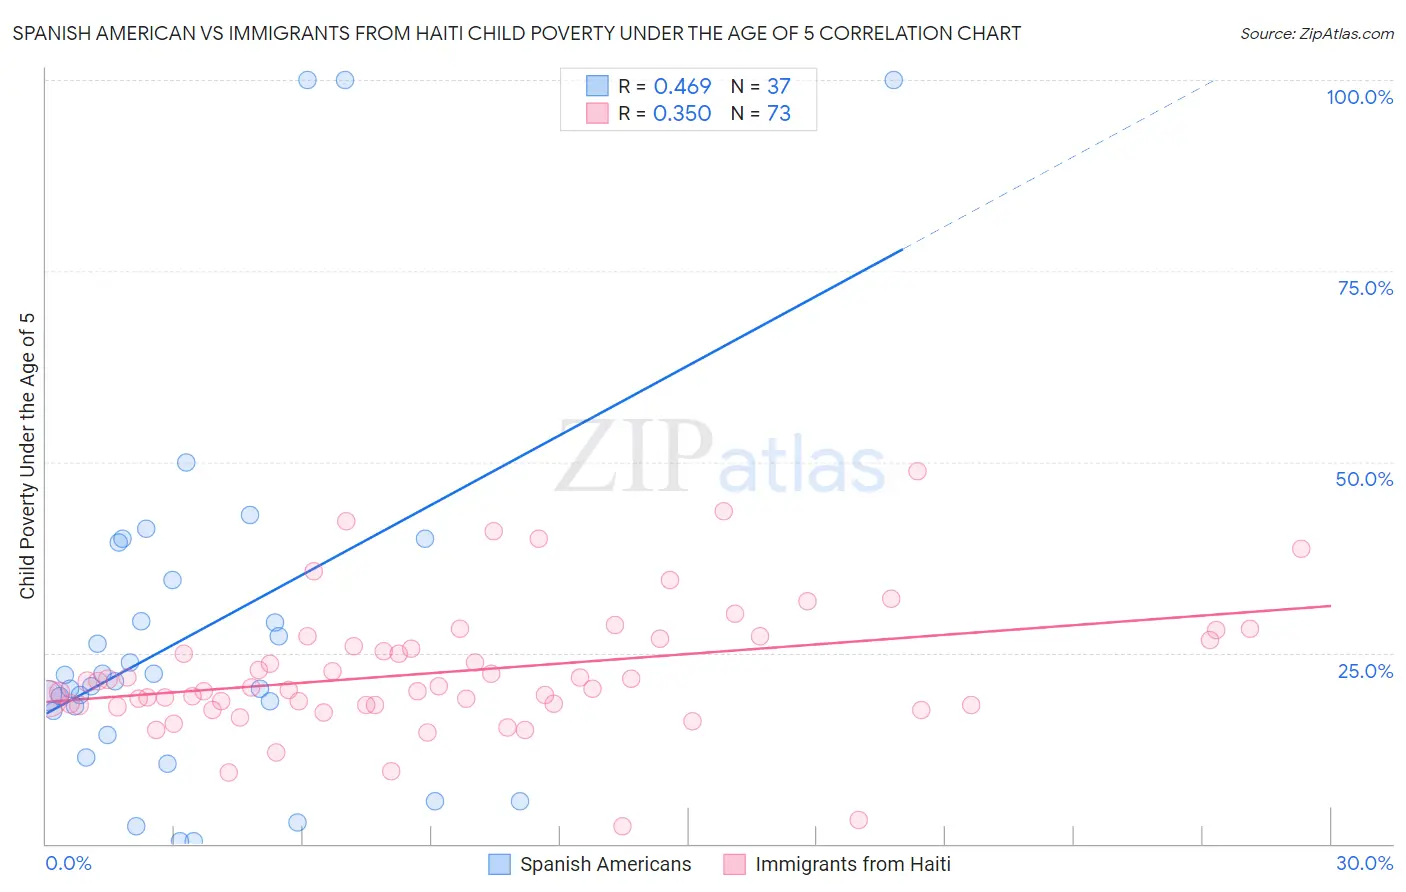 Spanish American vs Immigrants from Haiti Child Poverty Under the Age of 5